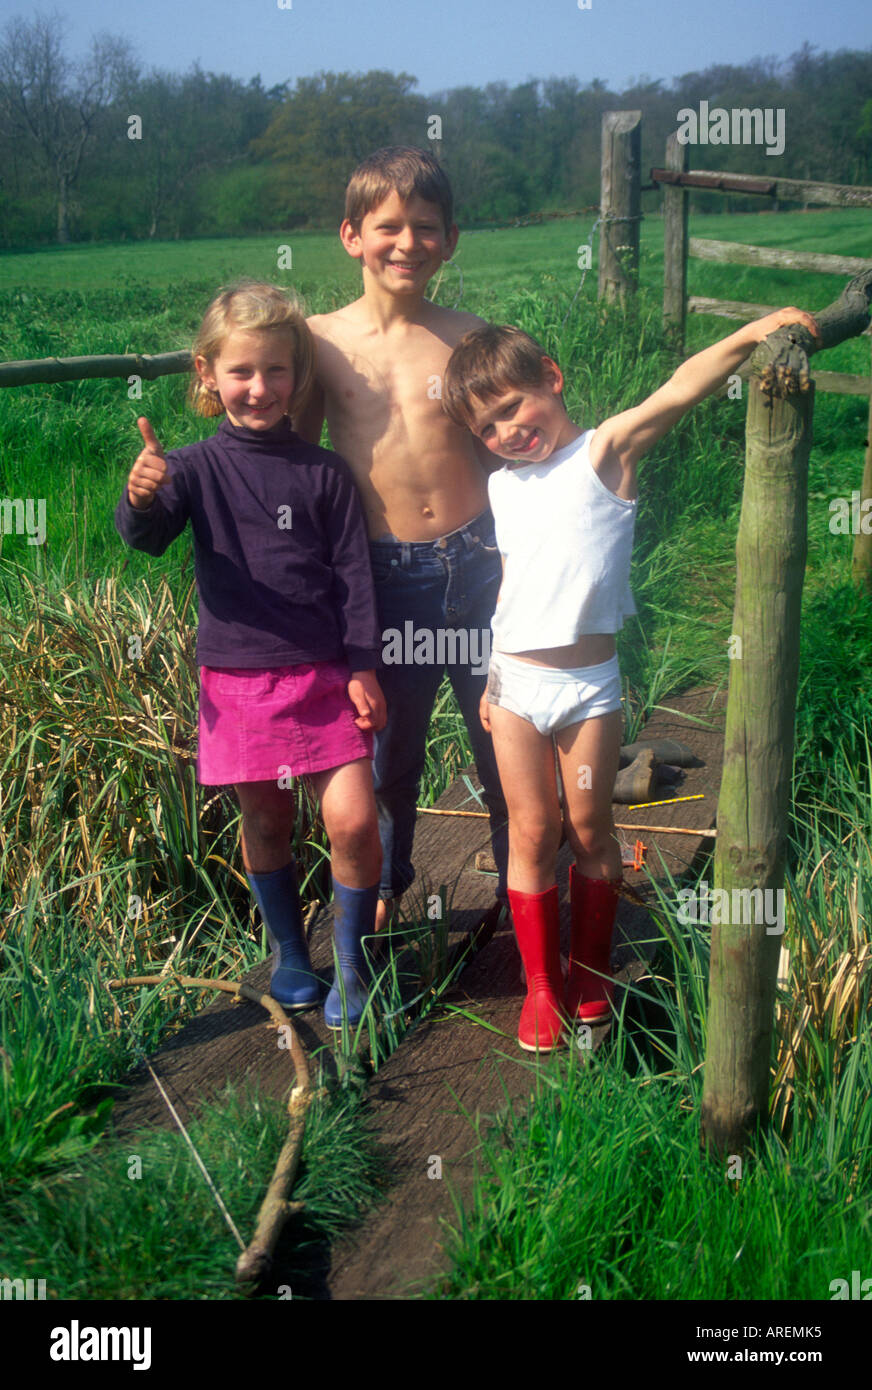 https://c8.alamy.com/comp/AREMK5/non-identical-boy-girl-twins-playing-in-a-field-with-their-big-brother-AREMK5.jpg